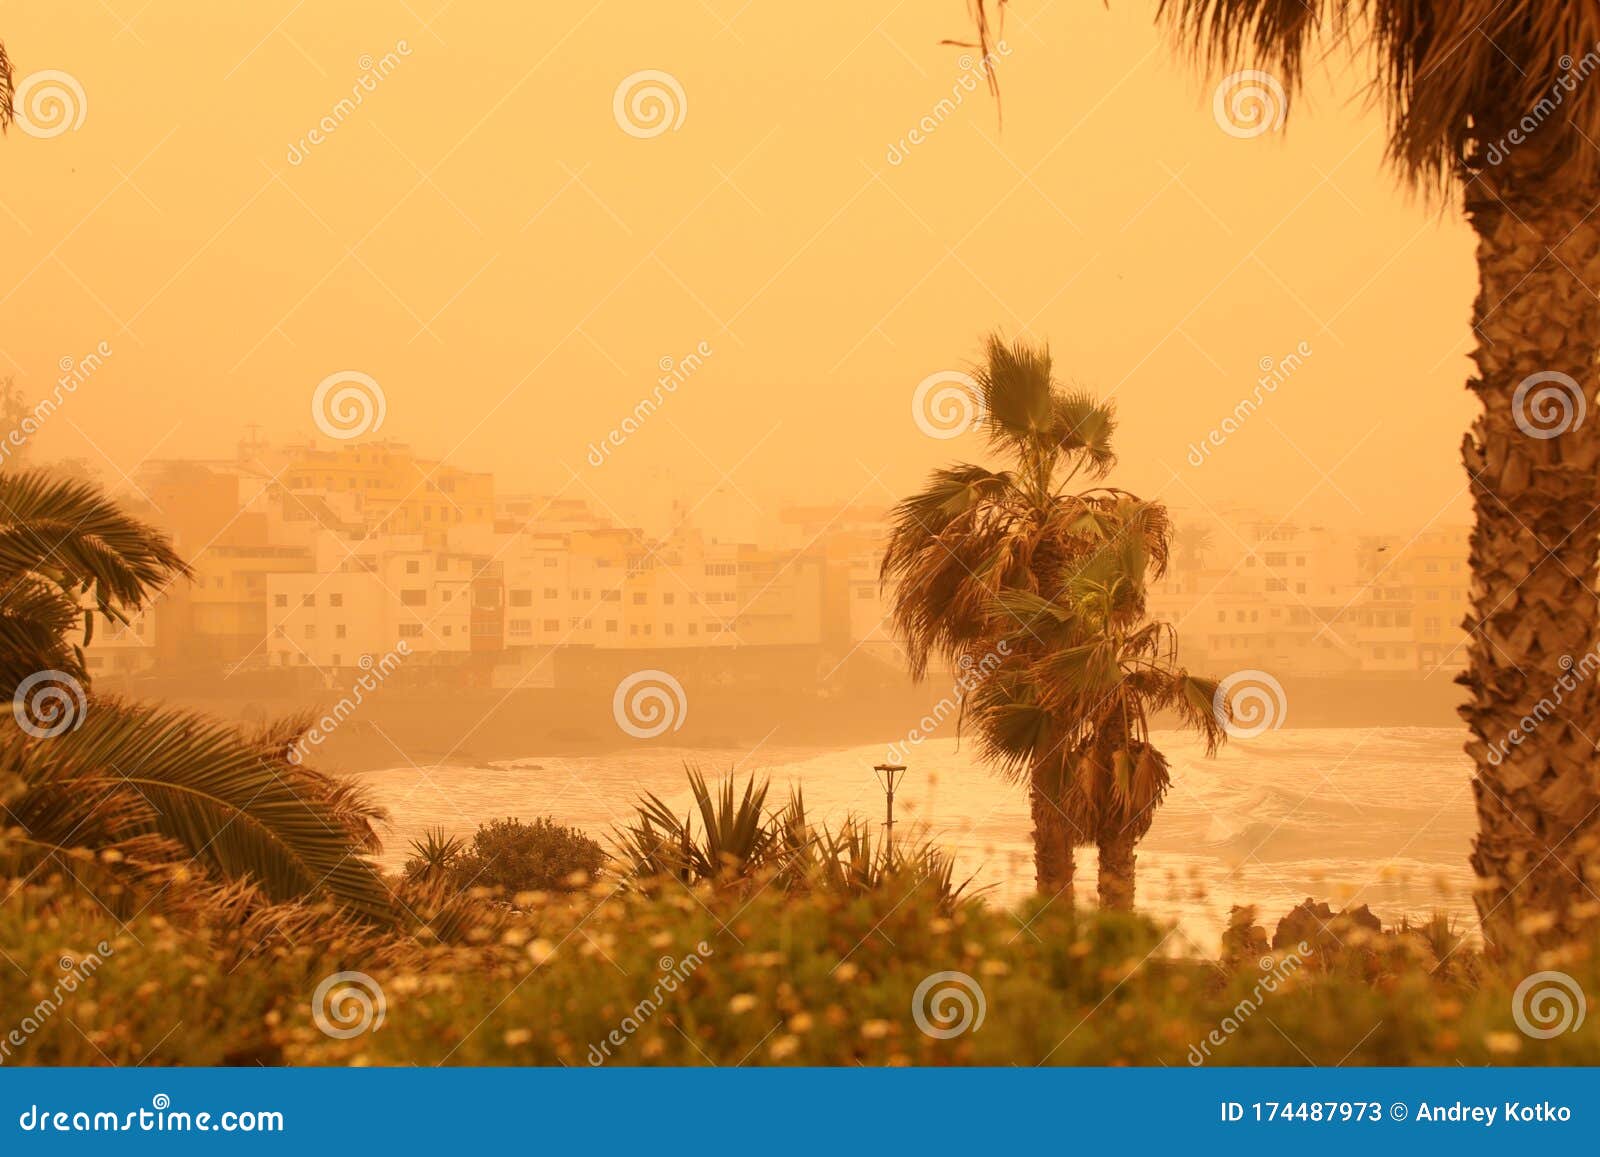 palm trees and buildings on the beach of canarian island. calima sand wind with dust from africa. calima sandstorm on